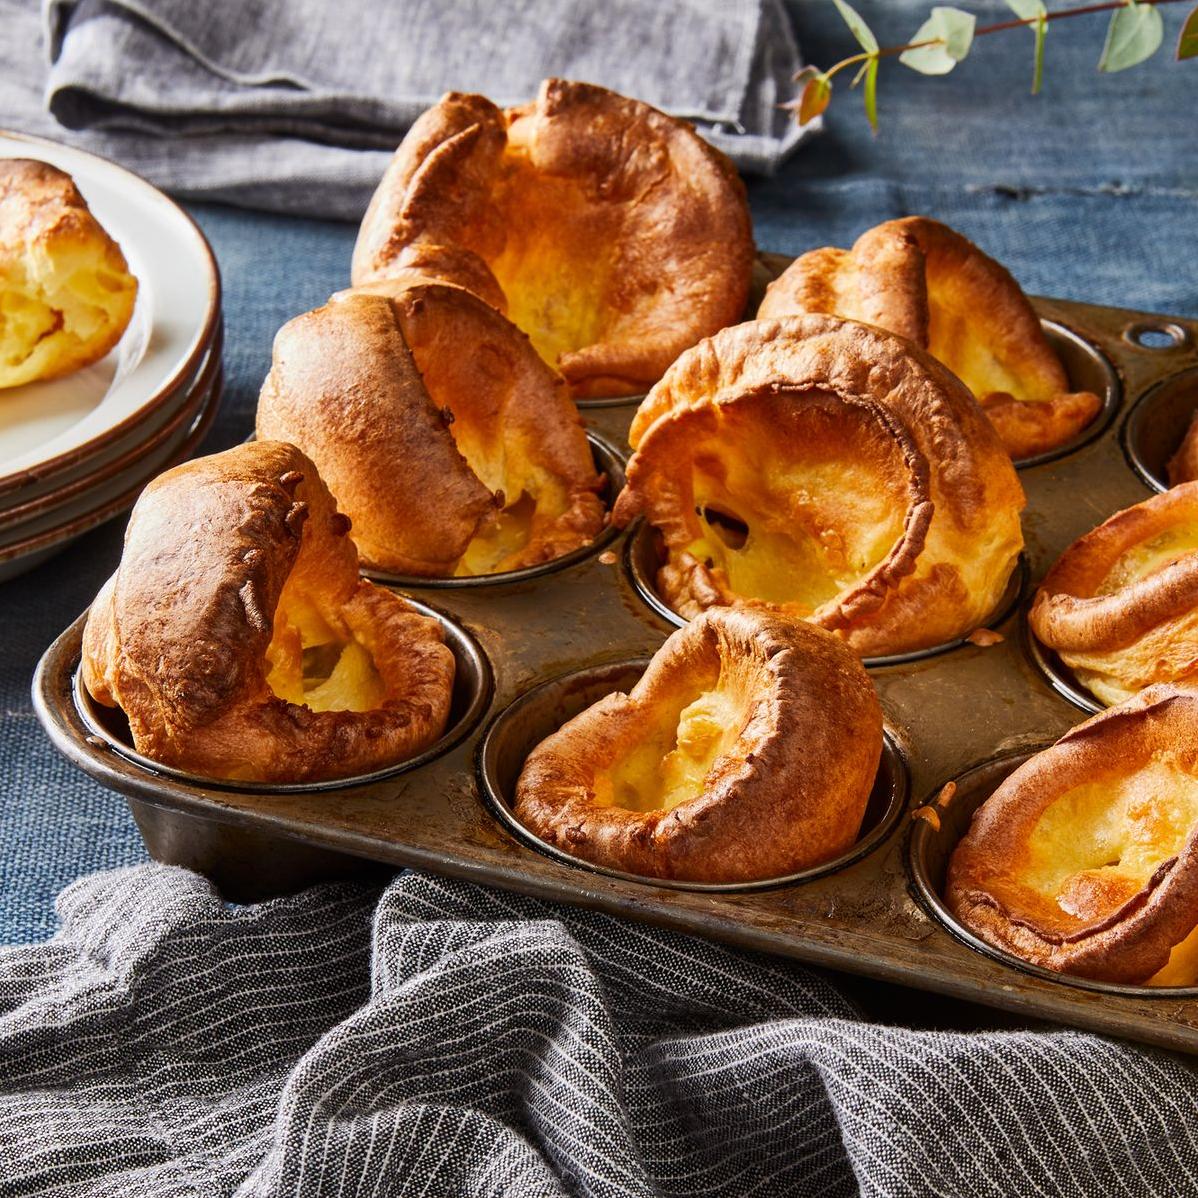  Yorkshire Pudding: the king of comfort food